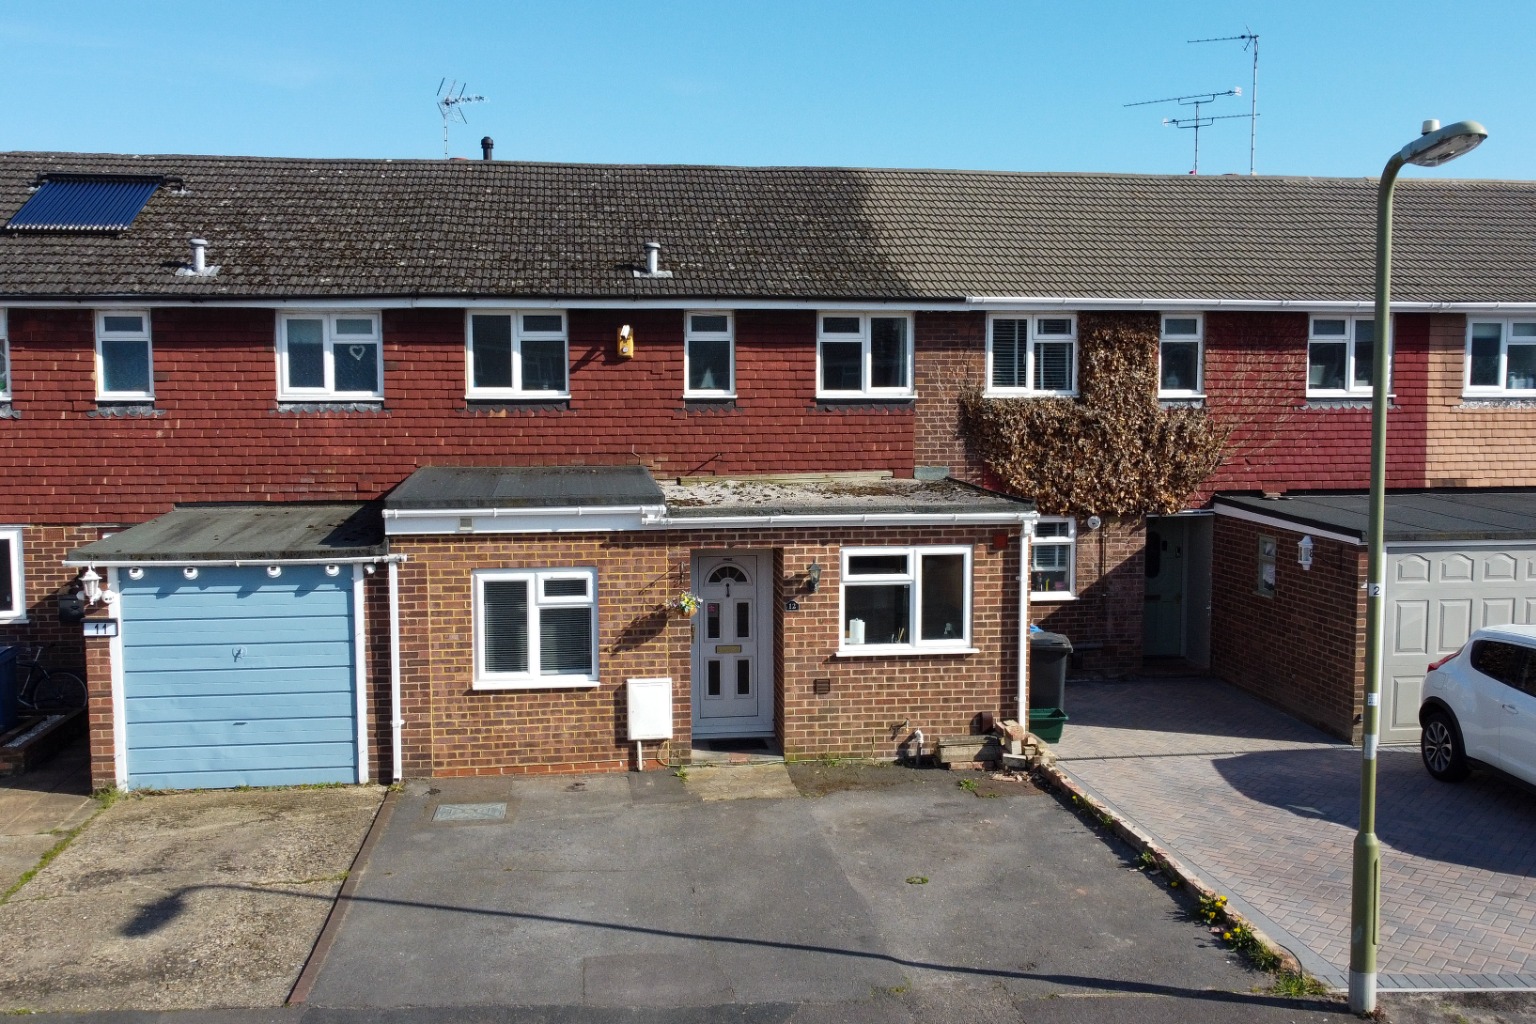 4 bed terraced house for sale in Romsey Close, Camberley, GU17